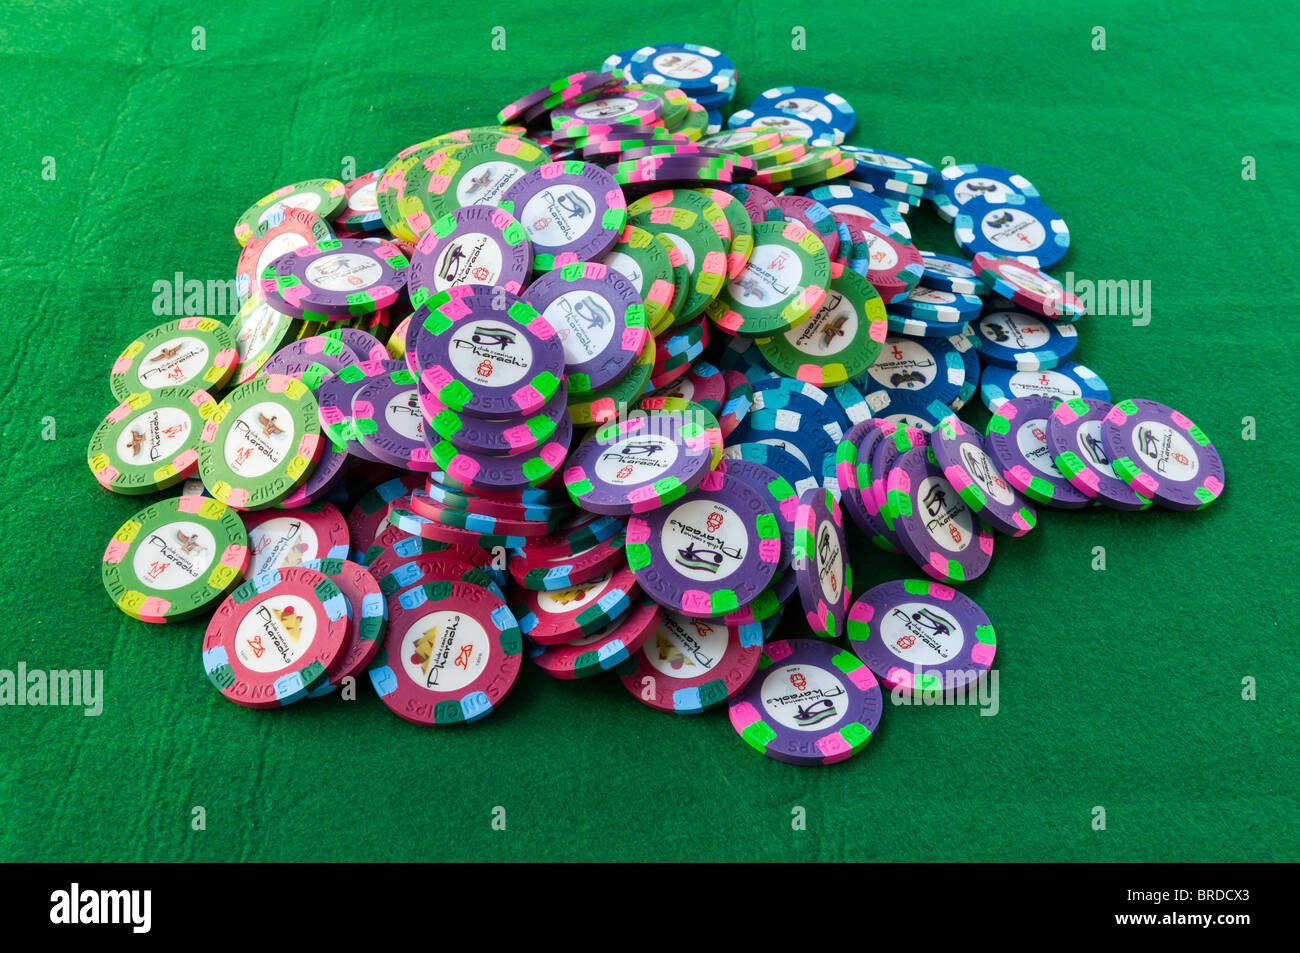 A pile of colorful poker chips Stock Photo